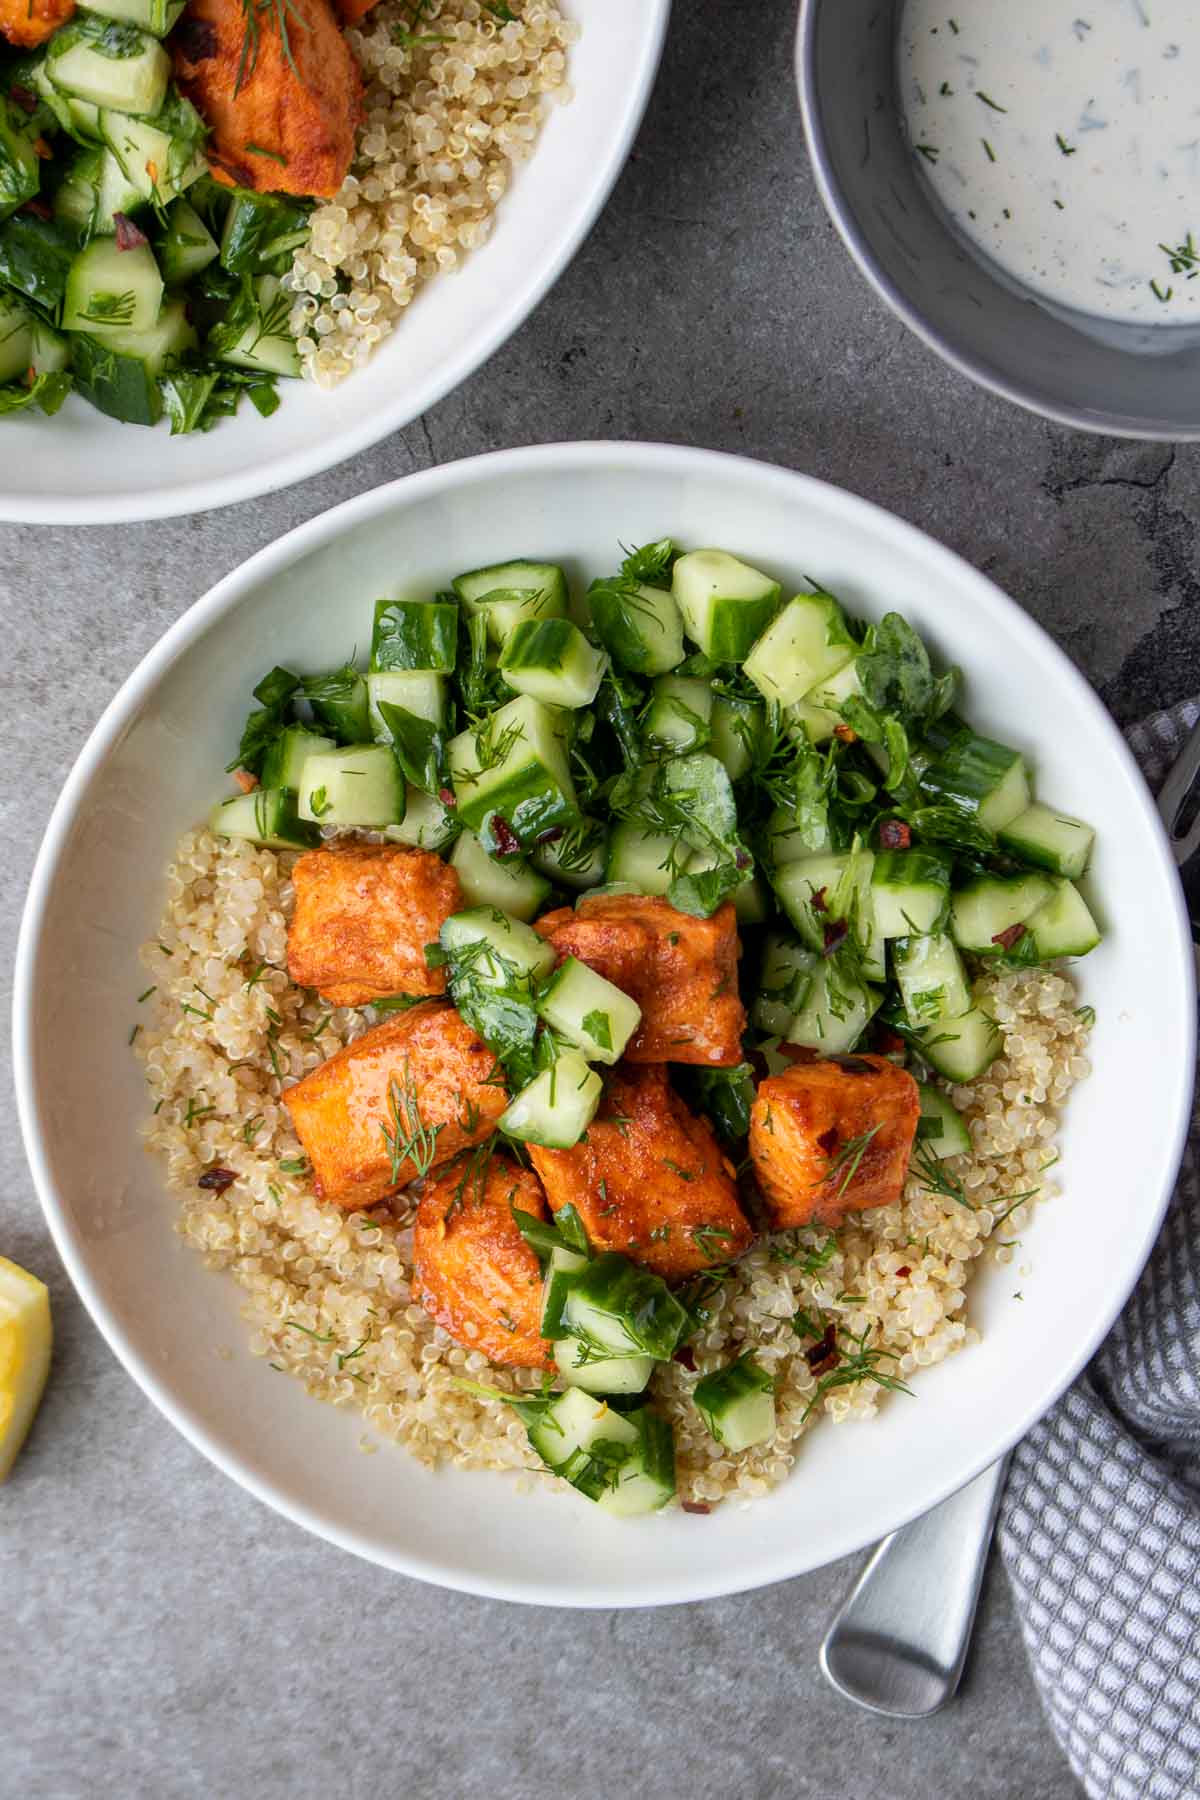 Bowls filled with quinoa and salmon.